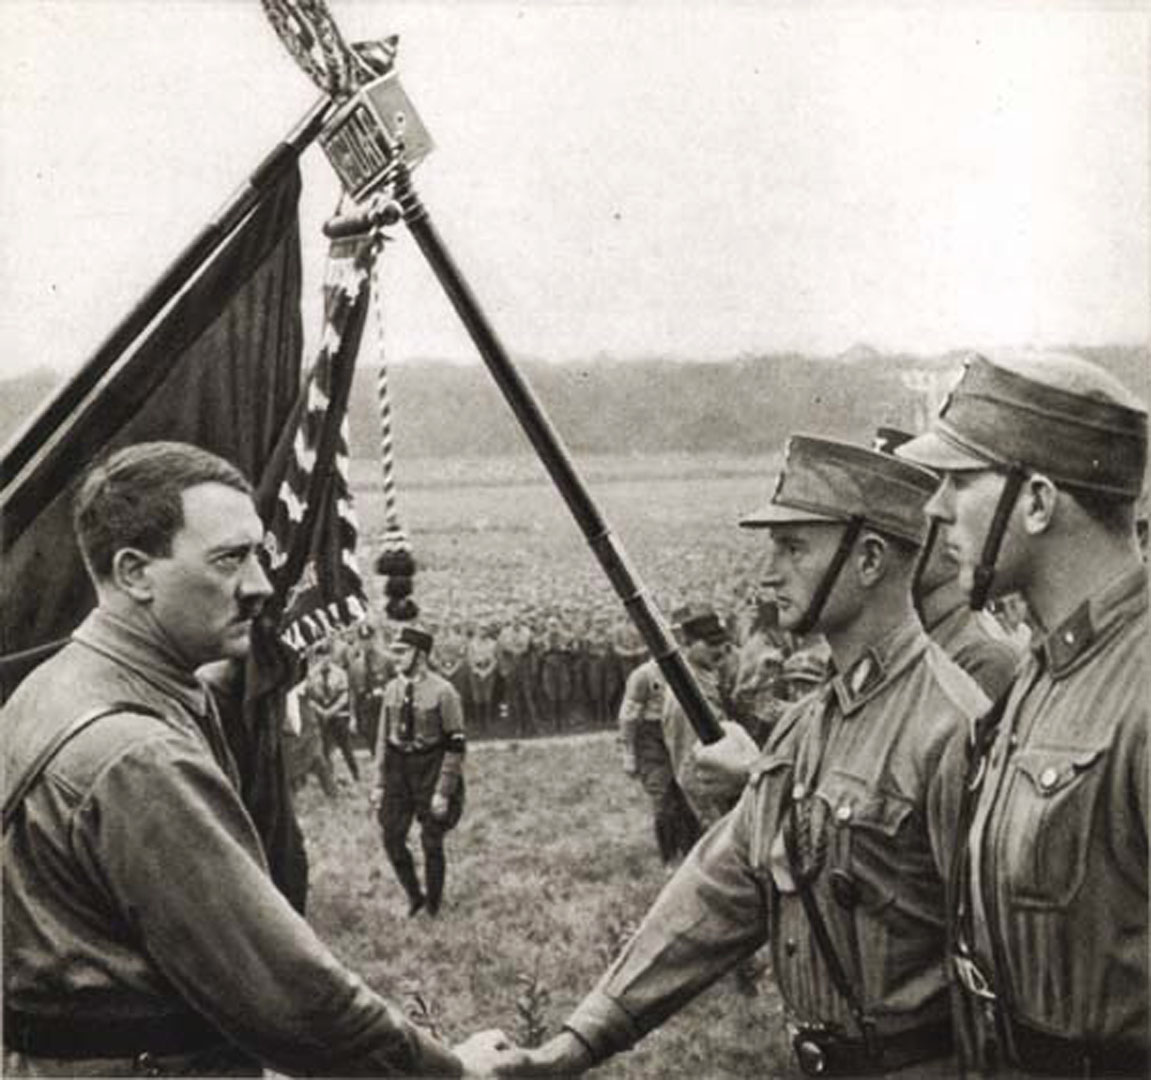 Hitler Acknowledging Flag Bearers Historical Nazi Third Reich Image